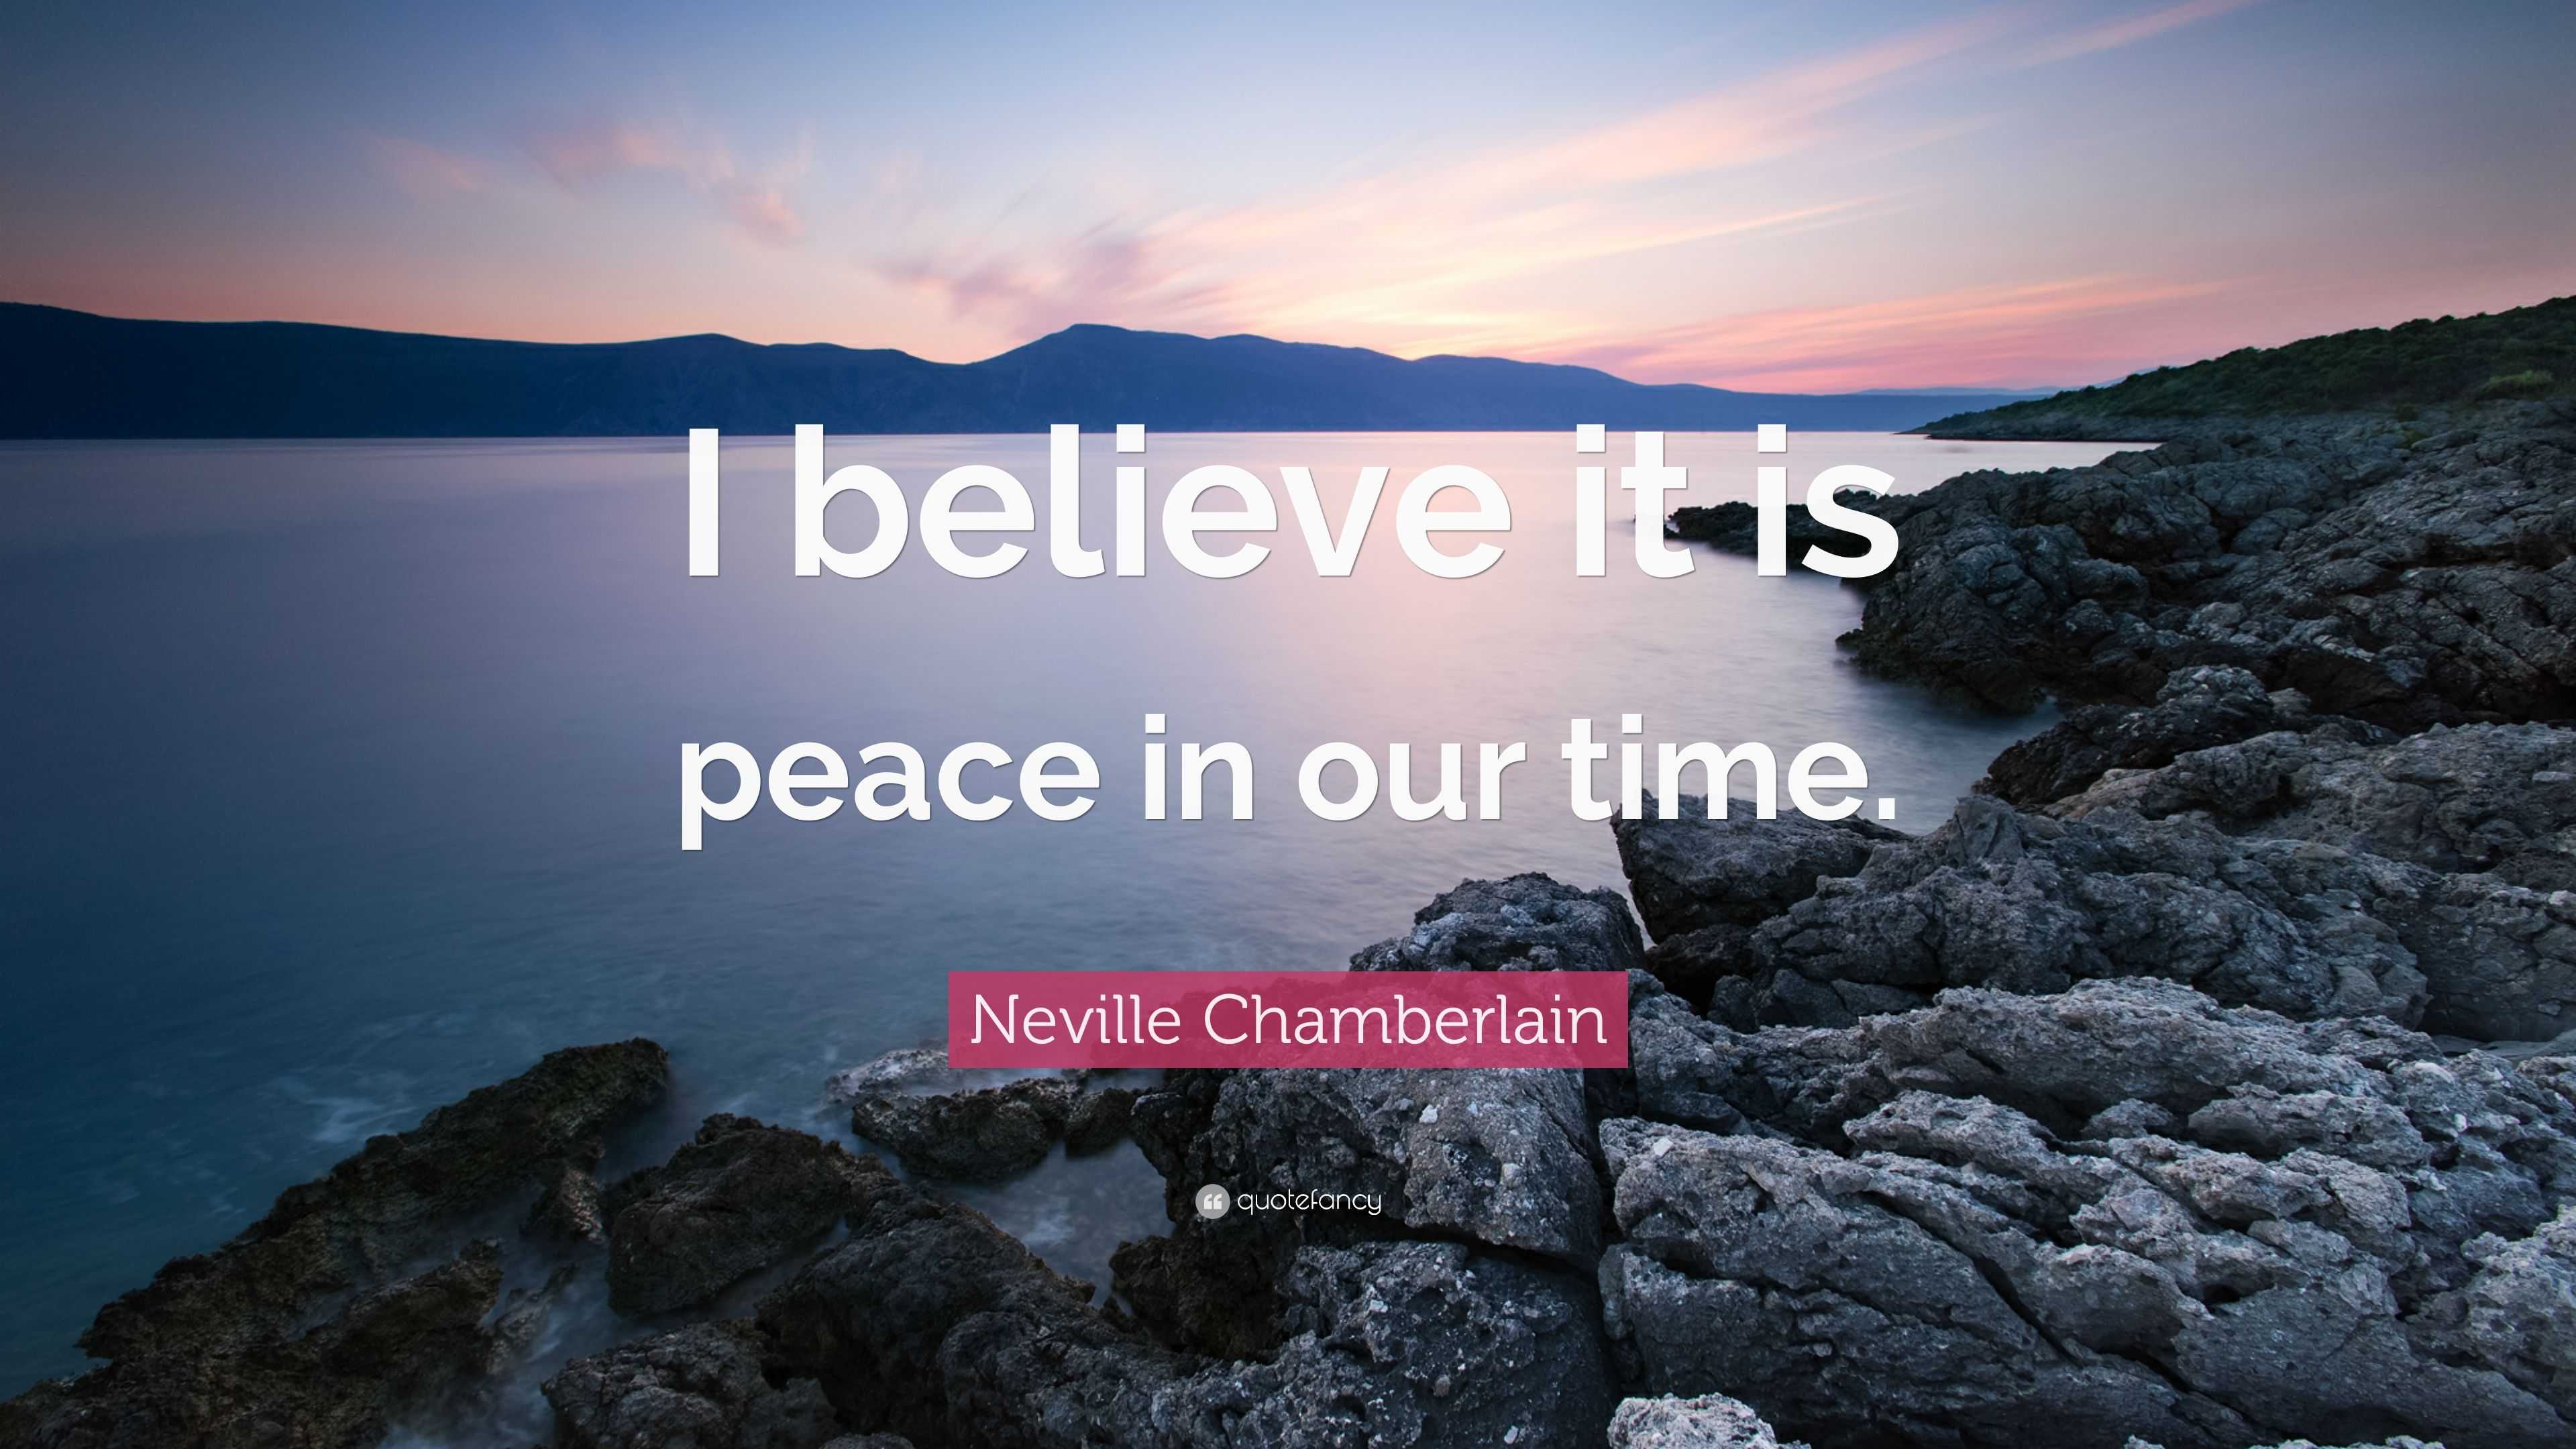 Chamberlain Quote: “I believe it is peace in our time.”